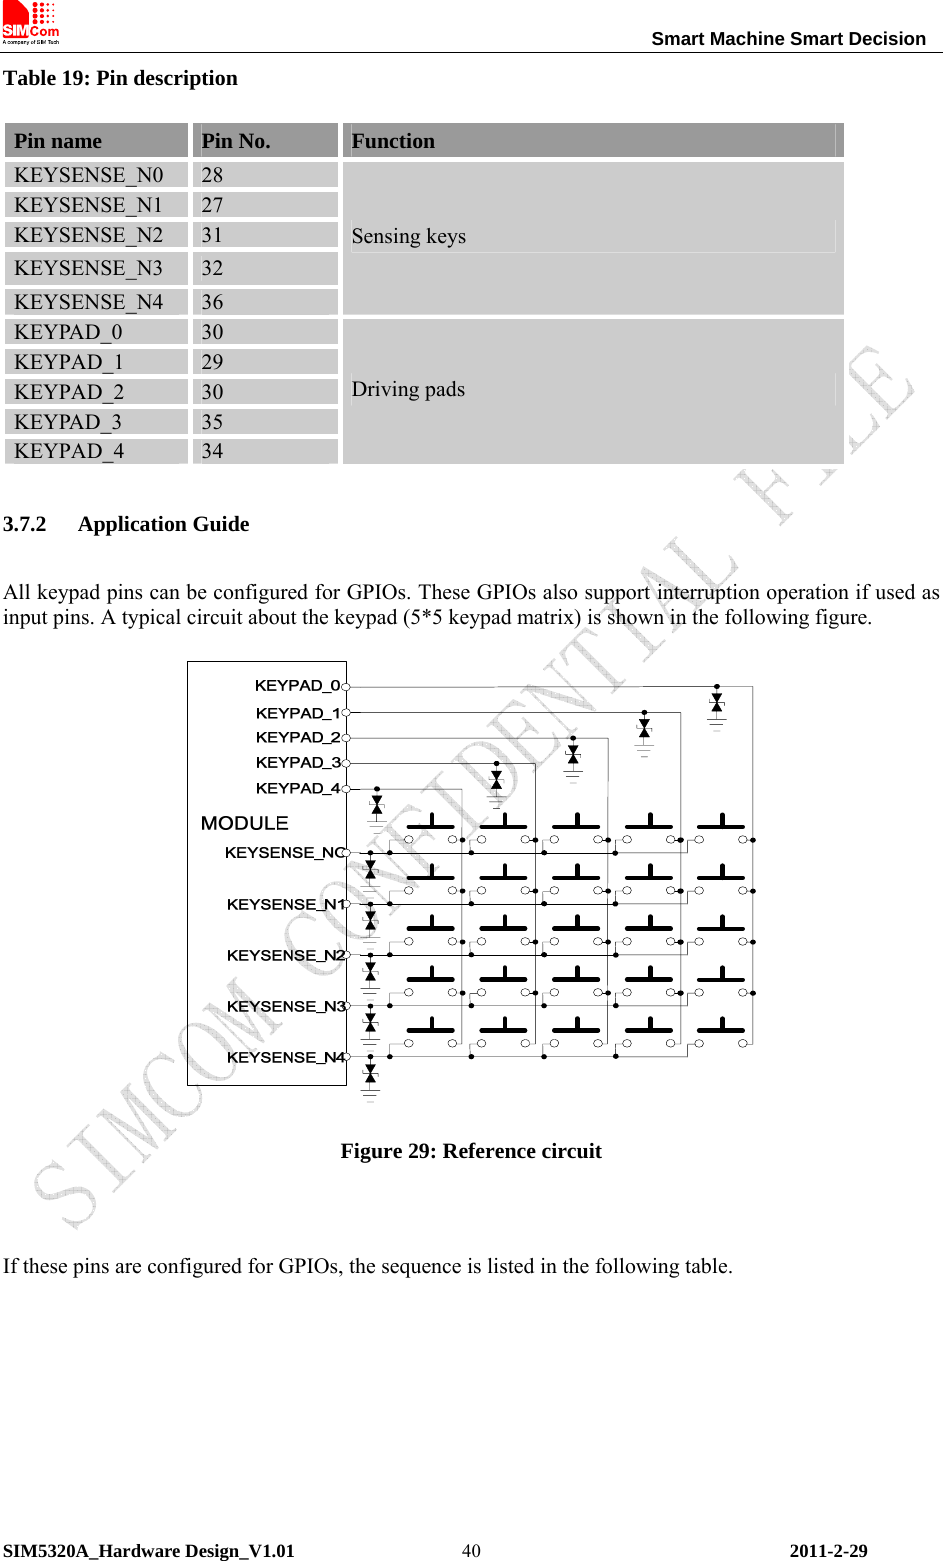                                                                Smart Machine Smart Decision SIM5320A_Hardware Design_V1.01   2011-2-29 40Table 19: Pin description Pin name  Pin No.  Function KEYSENSE_N0  28 KEYSENSE_N1  27 KEYSENSE_N2  31 KEYSENSE_N3  32 KEYSENSE_N4  36 Sensing keys KEYPAD_0  30 KEYPAD_1  29 KEYPAD_2  30 KEYPAD_3  35 KEYPAD_4  34 Driving pads 3.7.2 Application Guide All keypad pins can be configured for GPIOs. These GPIOs also support interruption operation if used as input pins. A typical circuit about the keypad (5*5 keypad matrix) is shown in the following figure.   Figure 29: Reference circuit  If these pins are configured for GPIOs, the sequence is listed in the following table.      